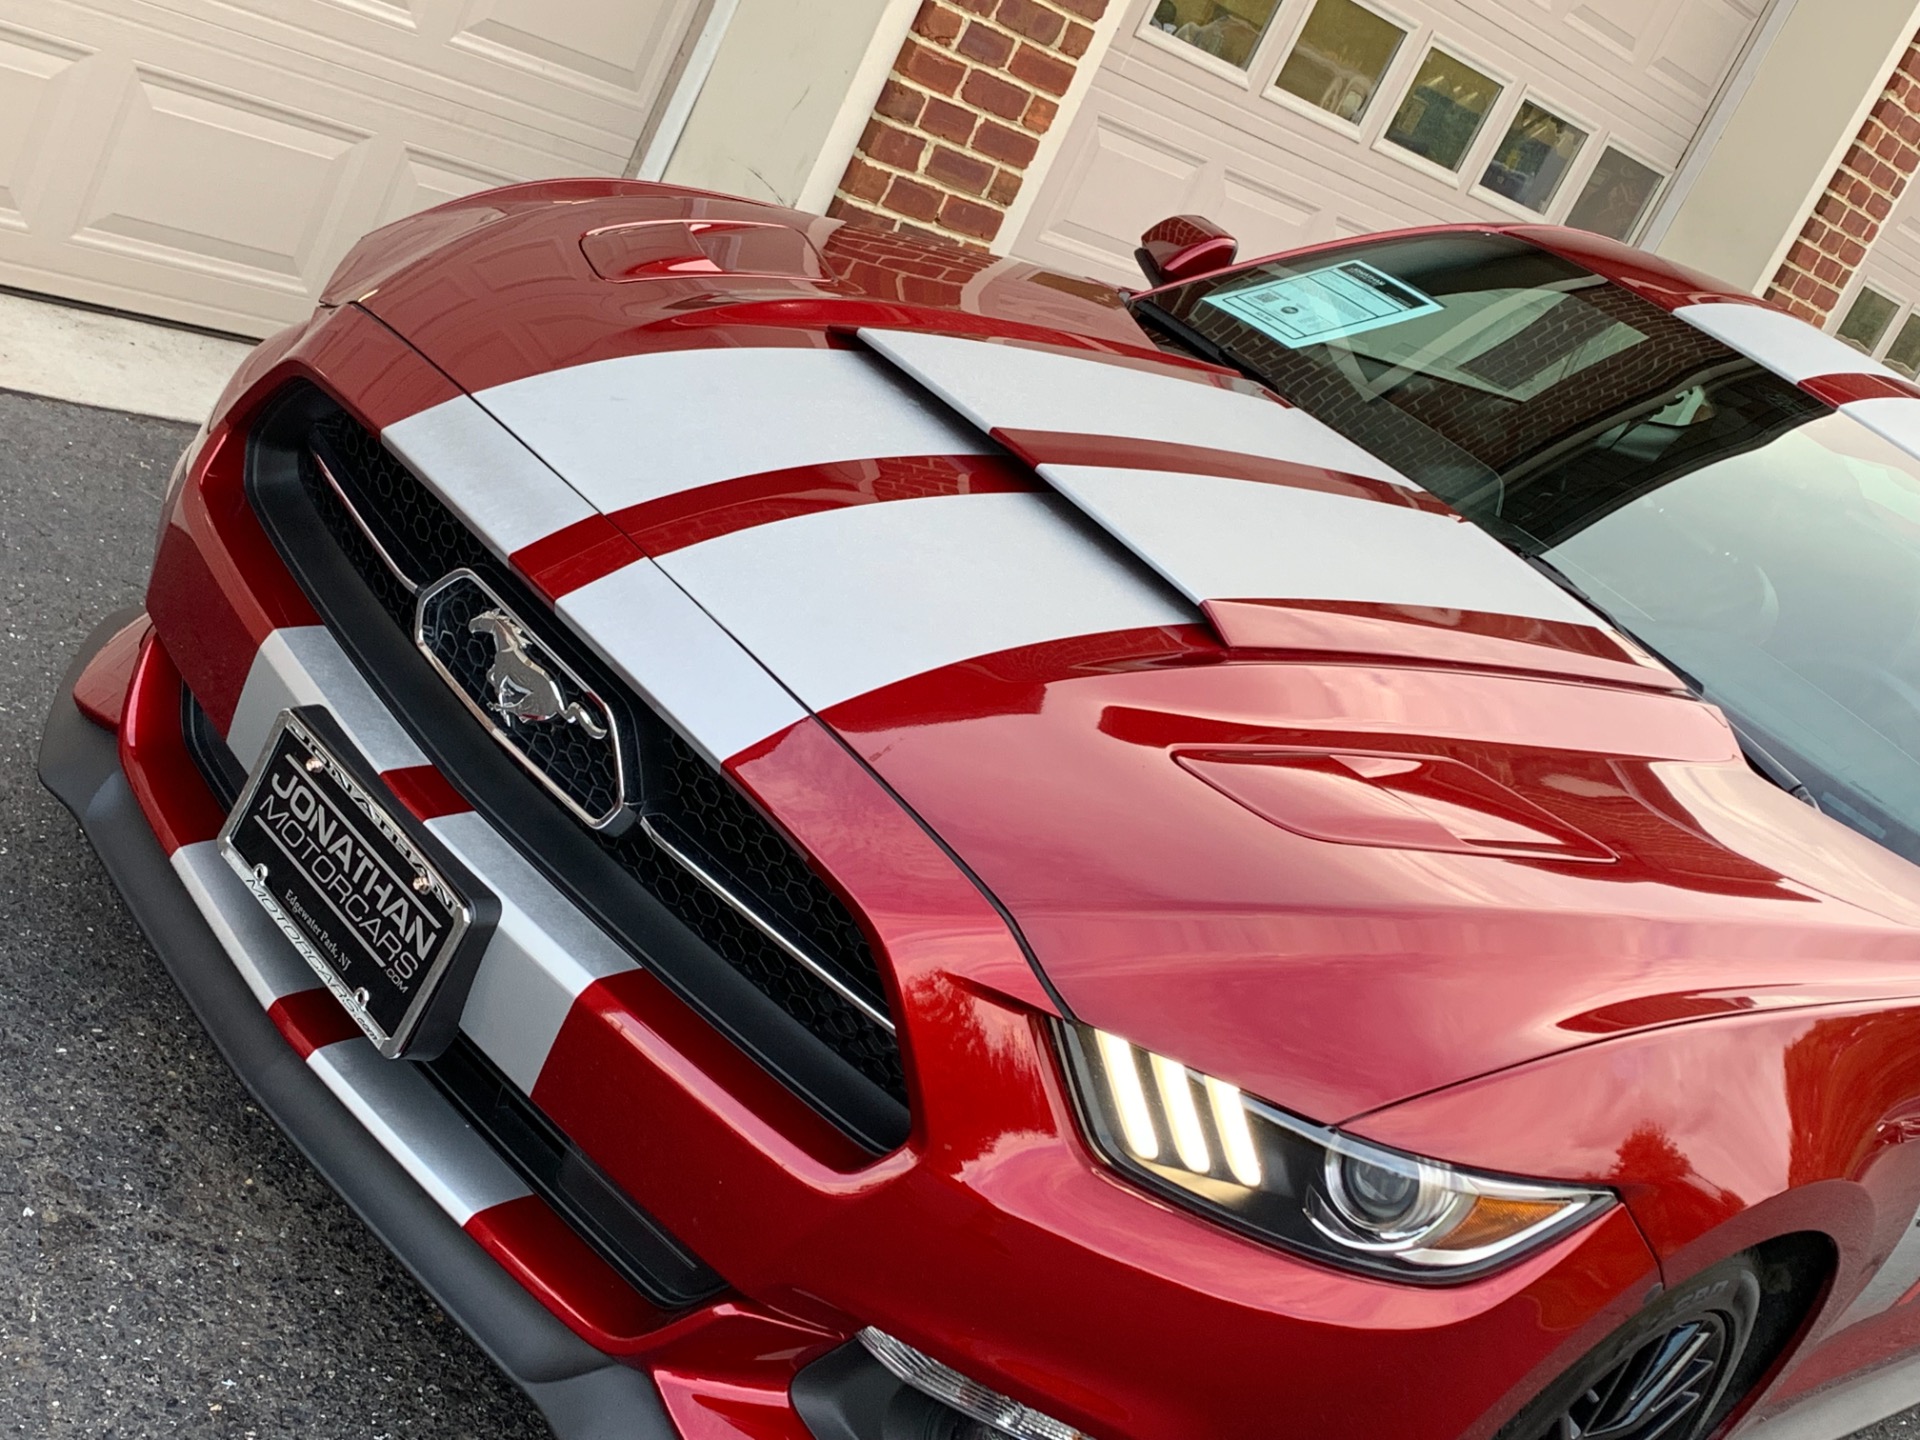 2015 Ford Mustang Gt Premium 50th Anniversary Performance Package Stock